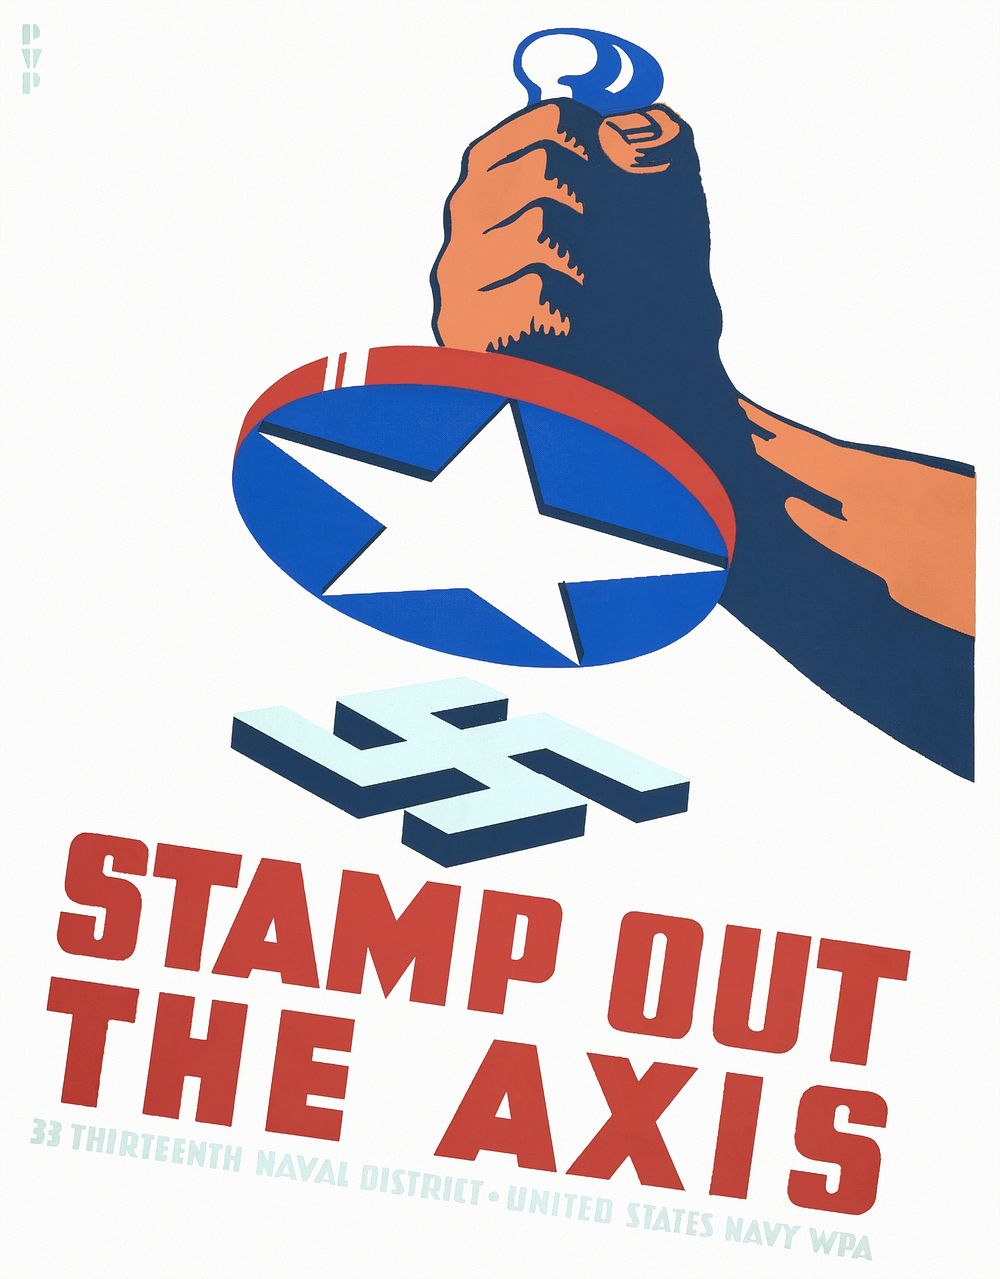 Stamp out the Axis / P.V.P. (1941) vintage poster by Phil Von Phul. Original public domain image from the Library of…